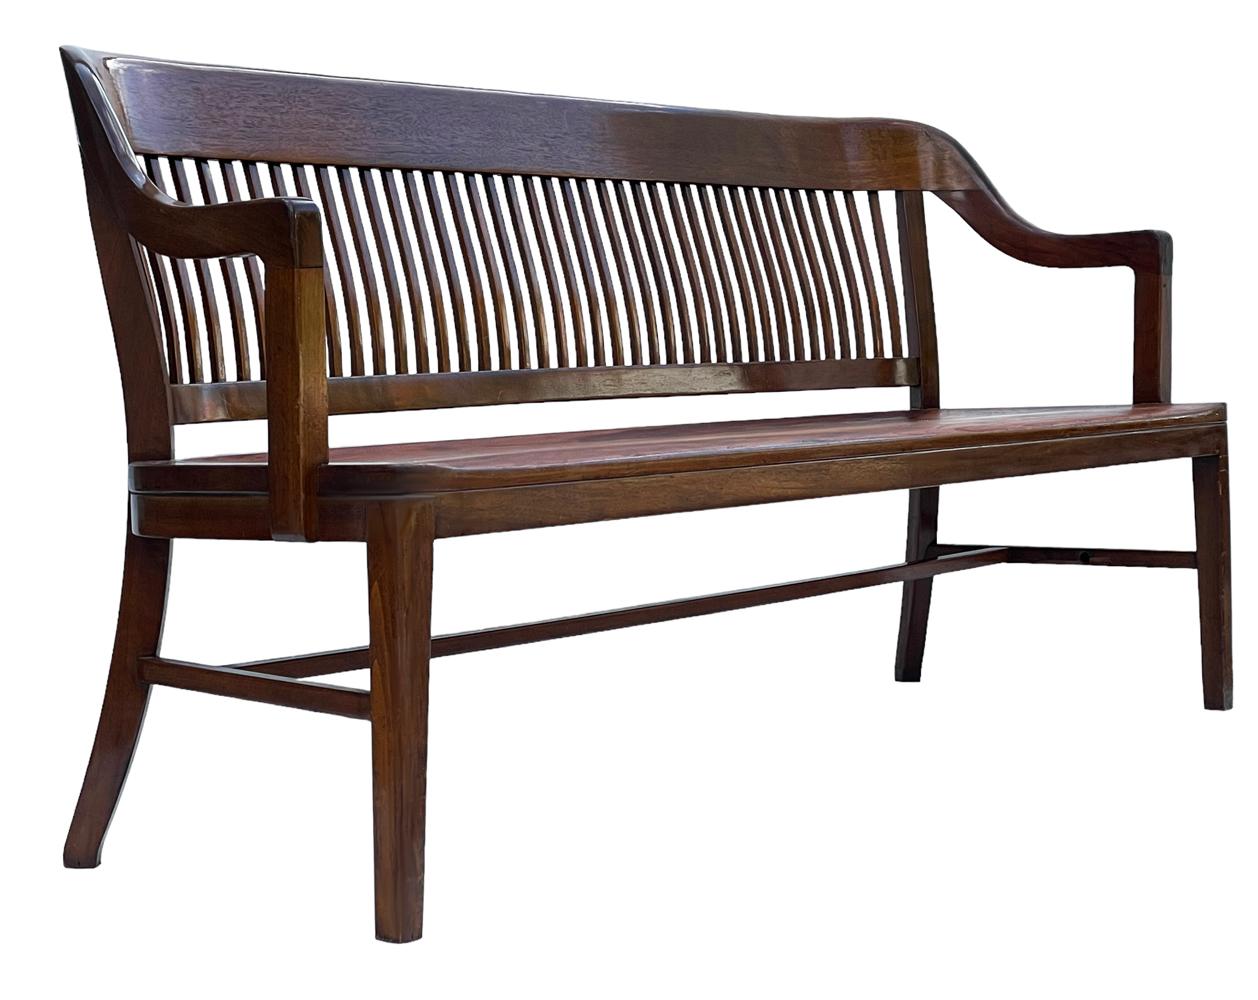 A classic solid bench from a Philadelphia Police station circa 1940's. It features solid dark stained oak construction. Very good ready to use condition. 